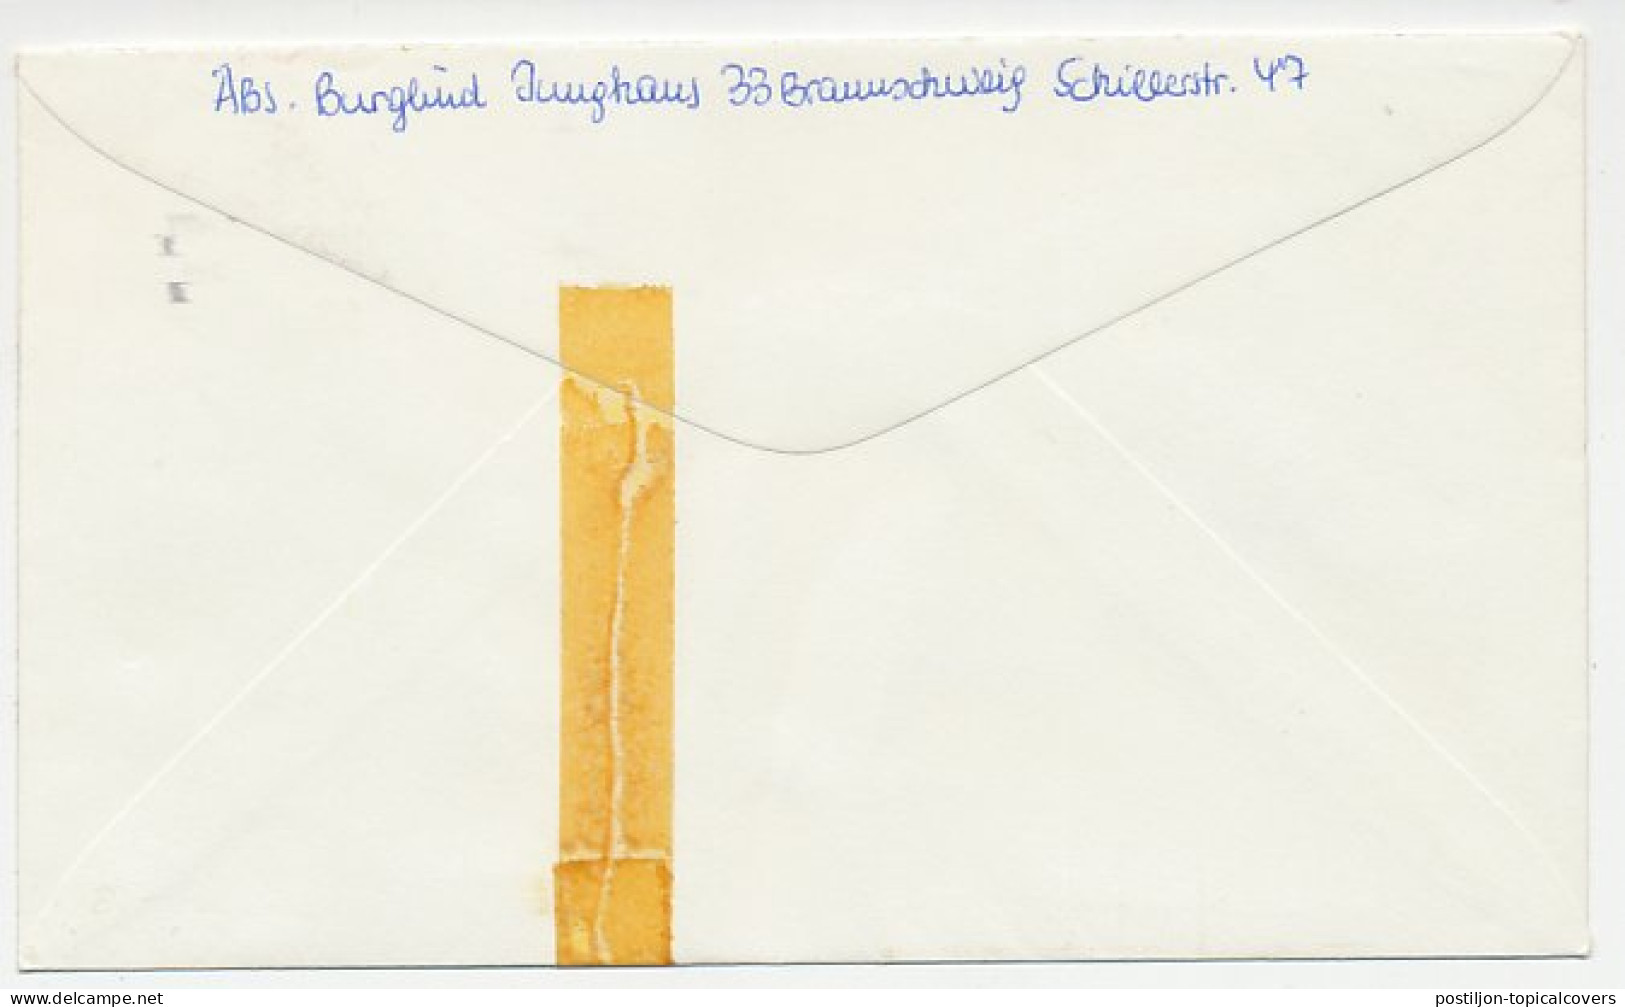 Damaged Mail Cover Germany 1970 Damaged By Mechanical Mail Distribution - Non Classés